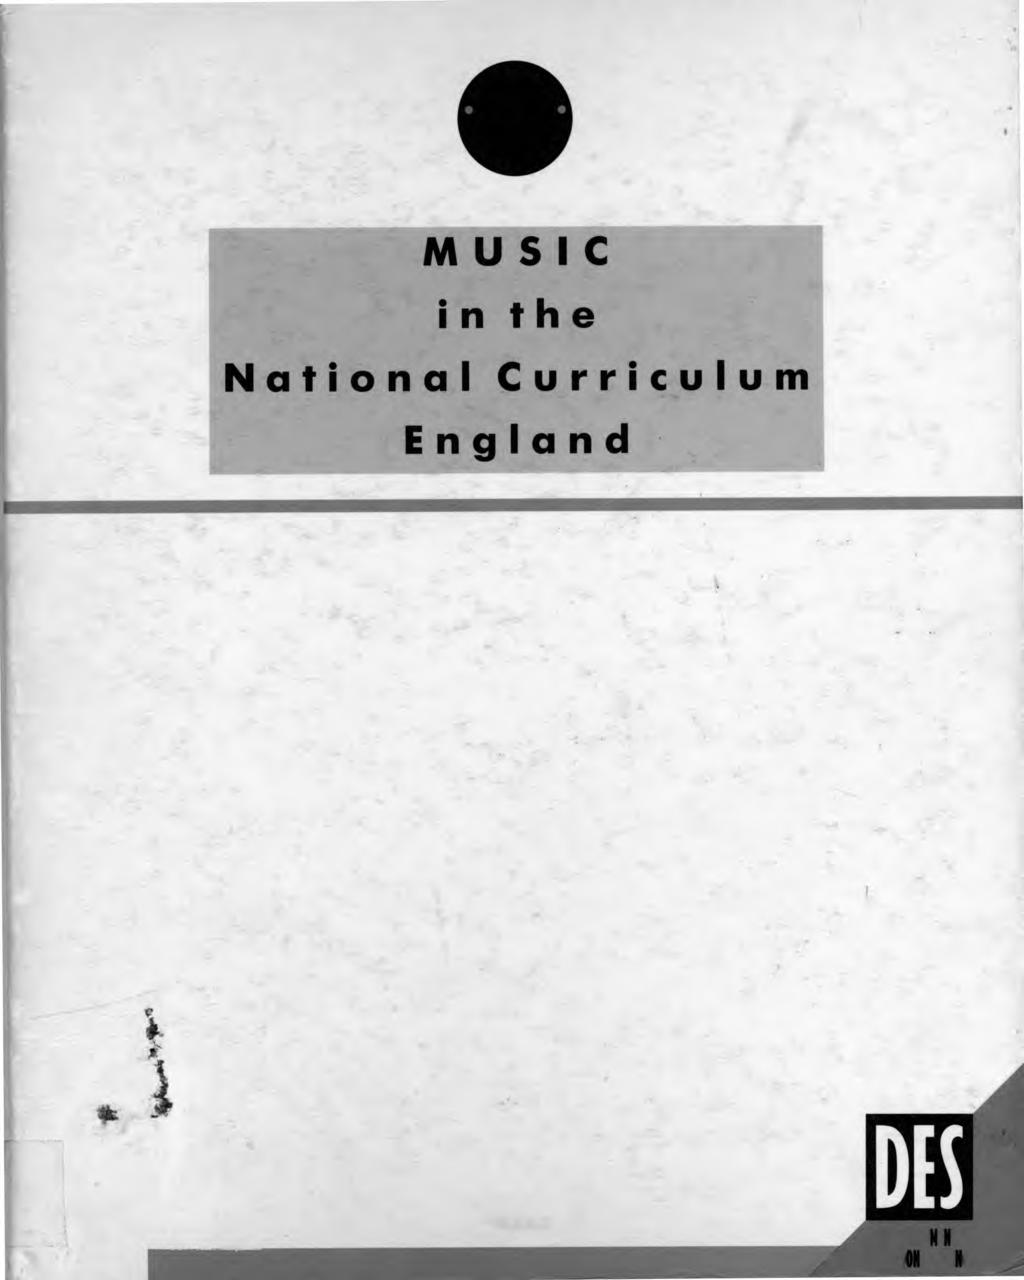 MUSIC in the National